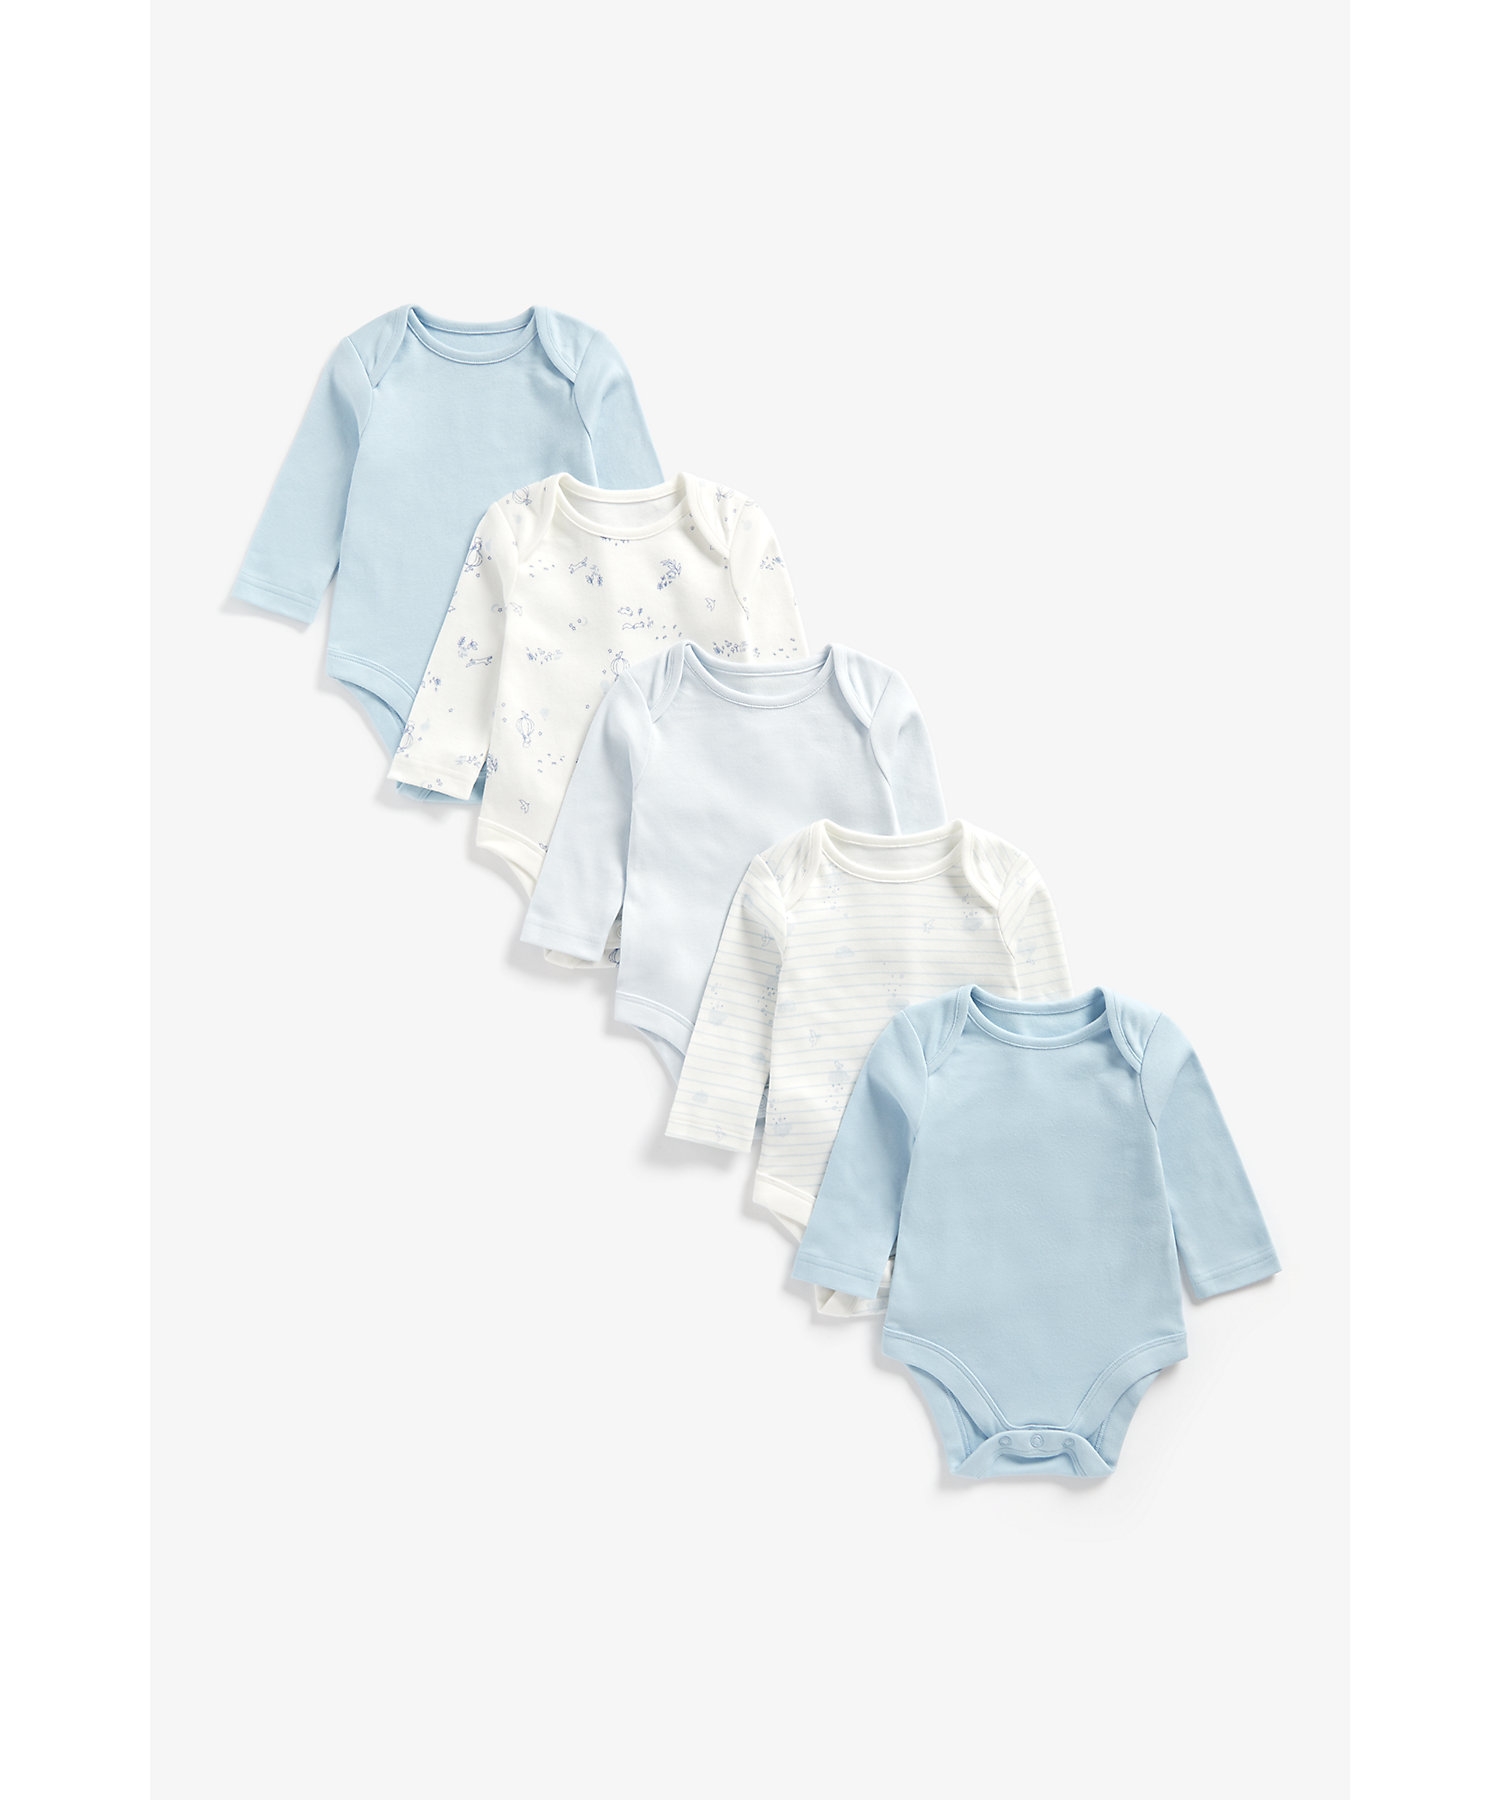 Mothercare | Boys Full Sleeves Bodysuit Striped And Printed - Pack Of 5 - Blue 0